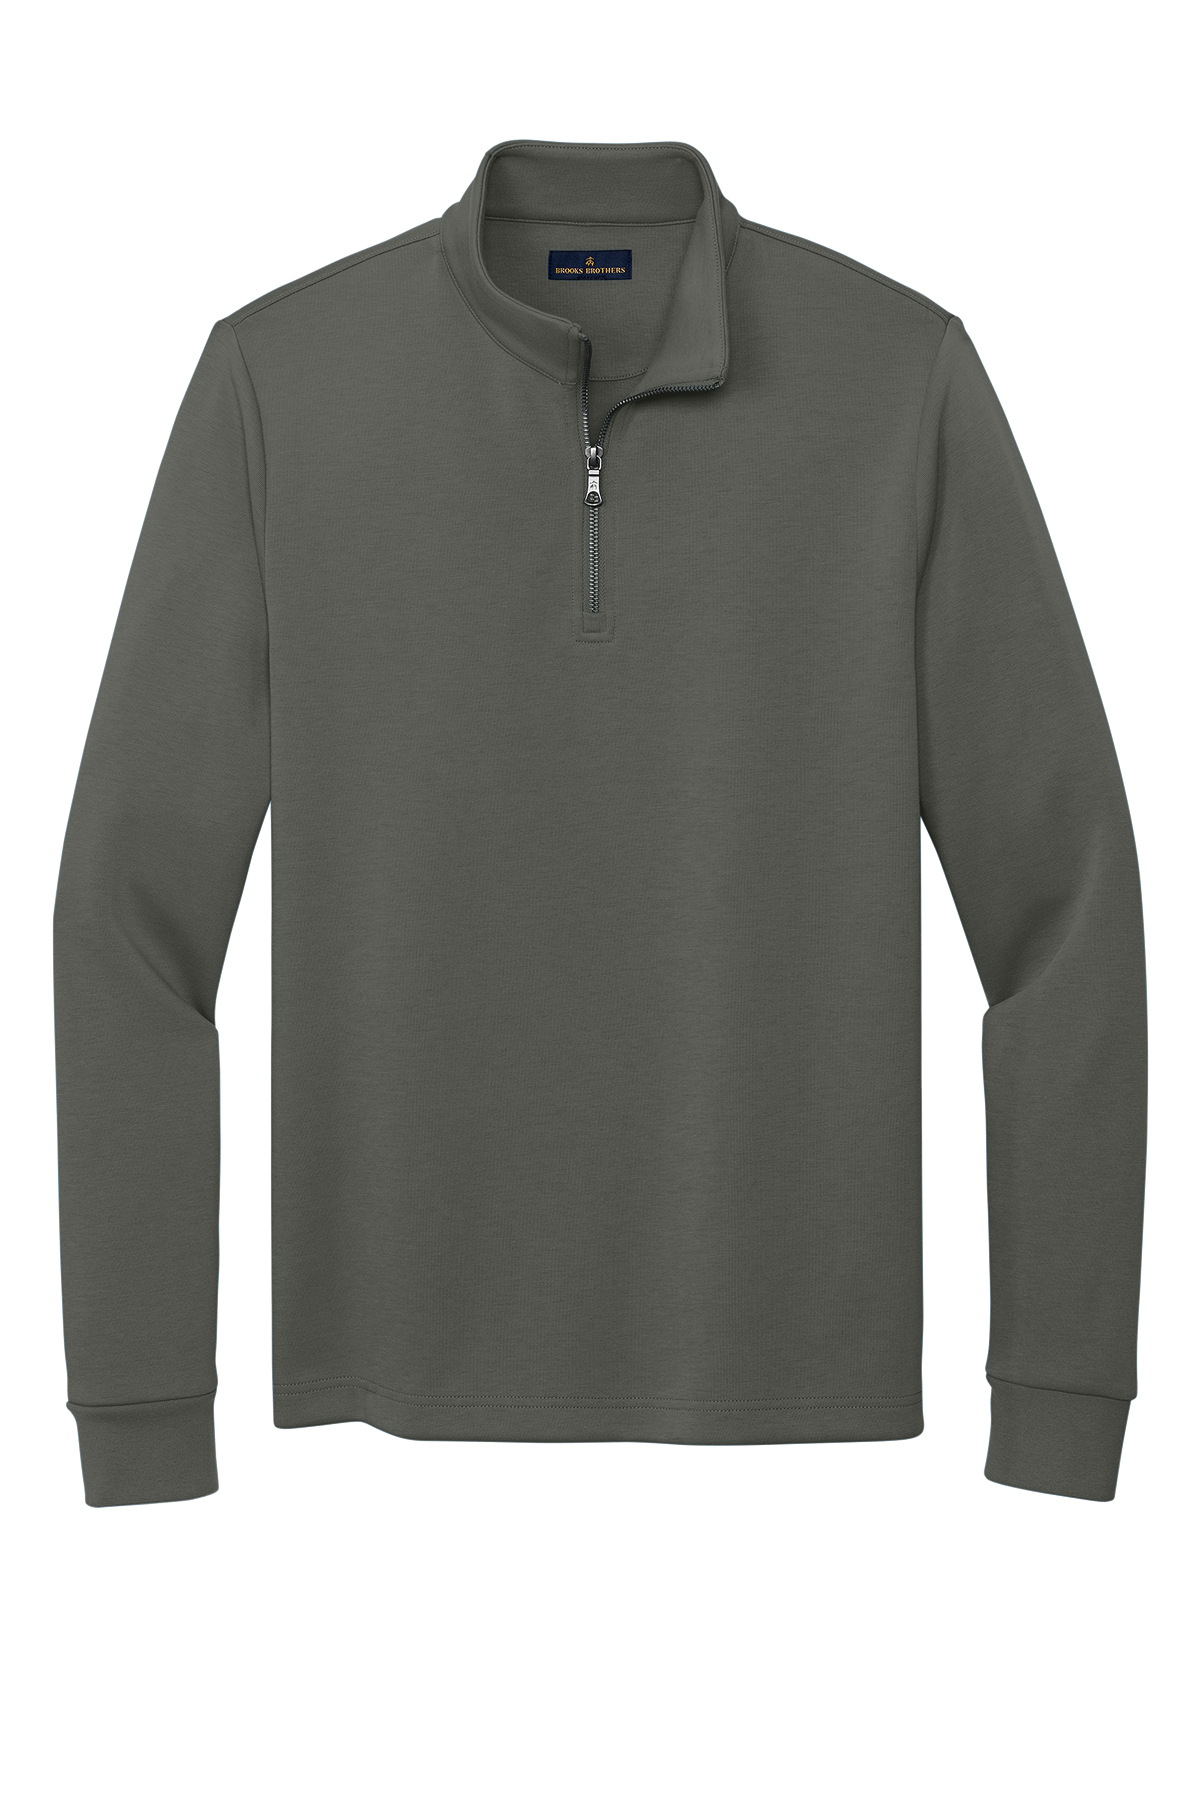 Brooks Brothers Double-Knit 1/4-Zip | Product | SanMar